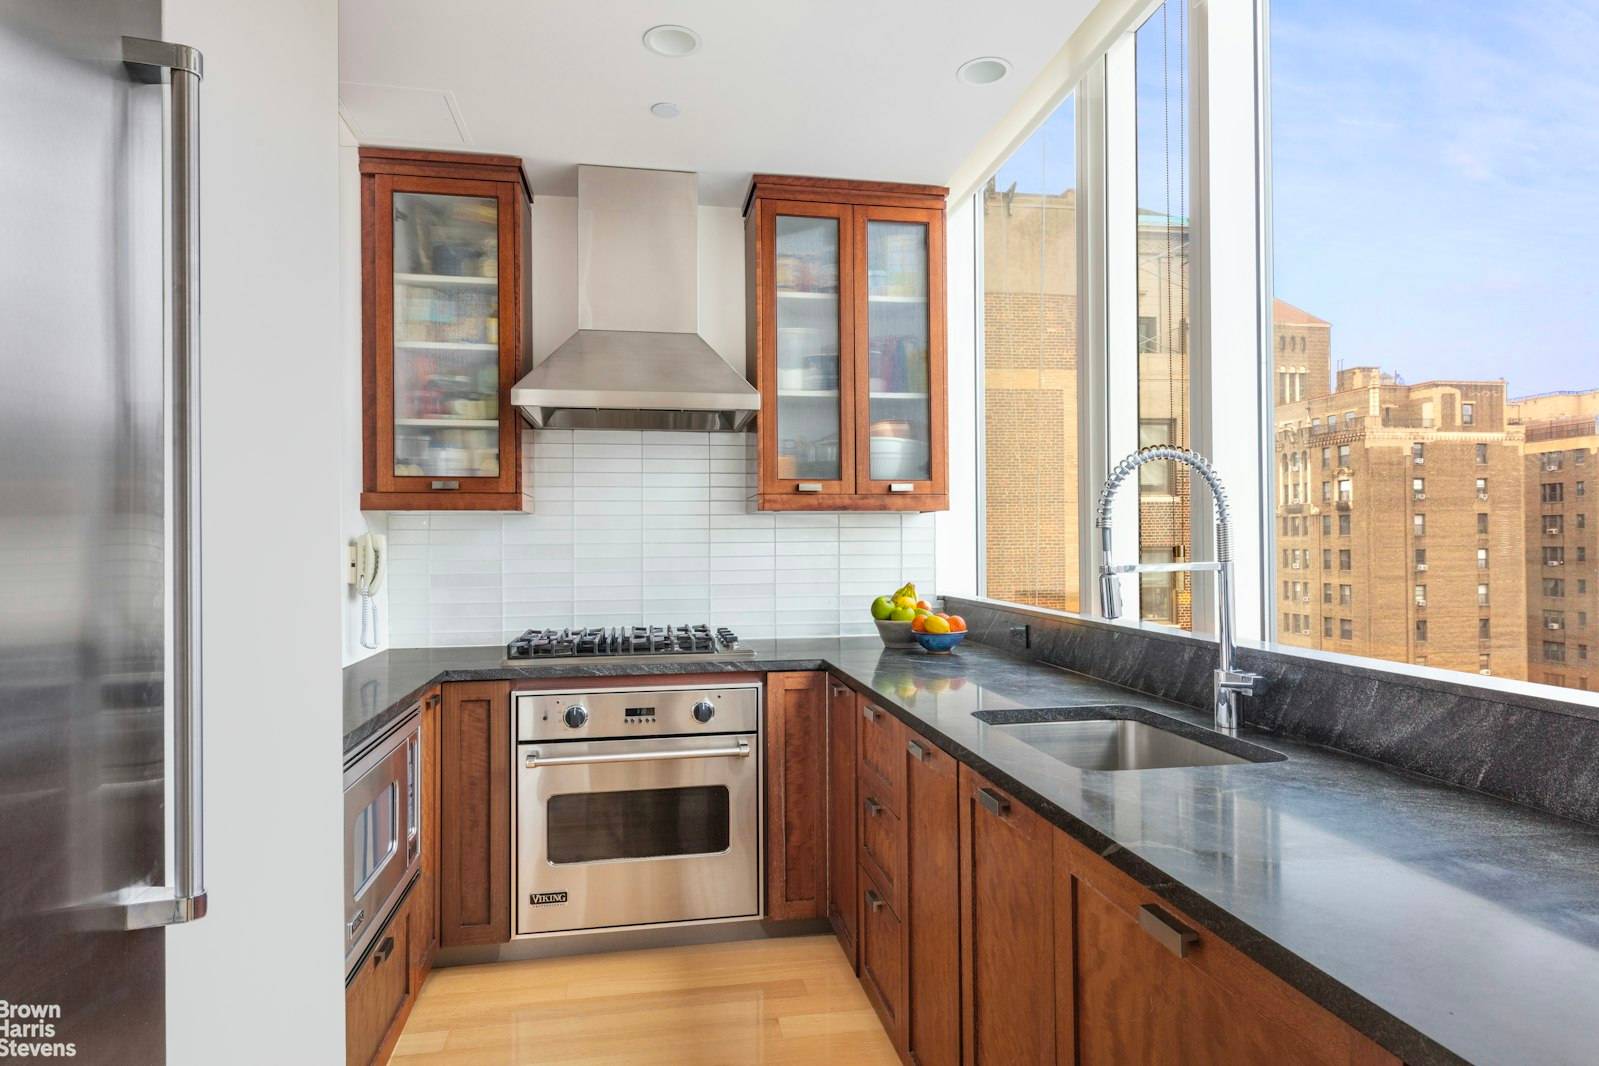 12C is a UNICORN. A rare modern 2BR 2BTH condo with open East sunshine city views, an oversized FREE storage bin that transfers, double amenities including a swimming pool and ...